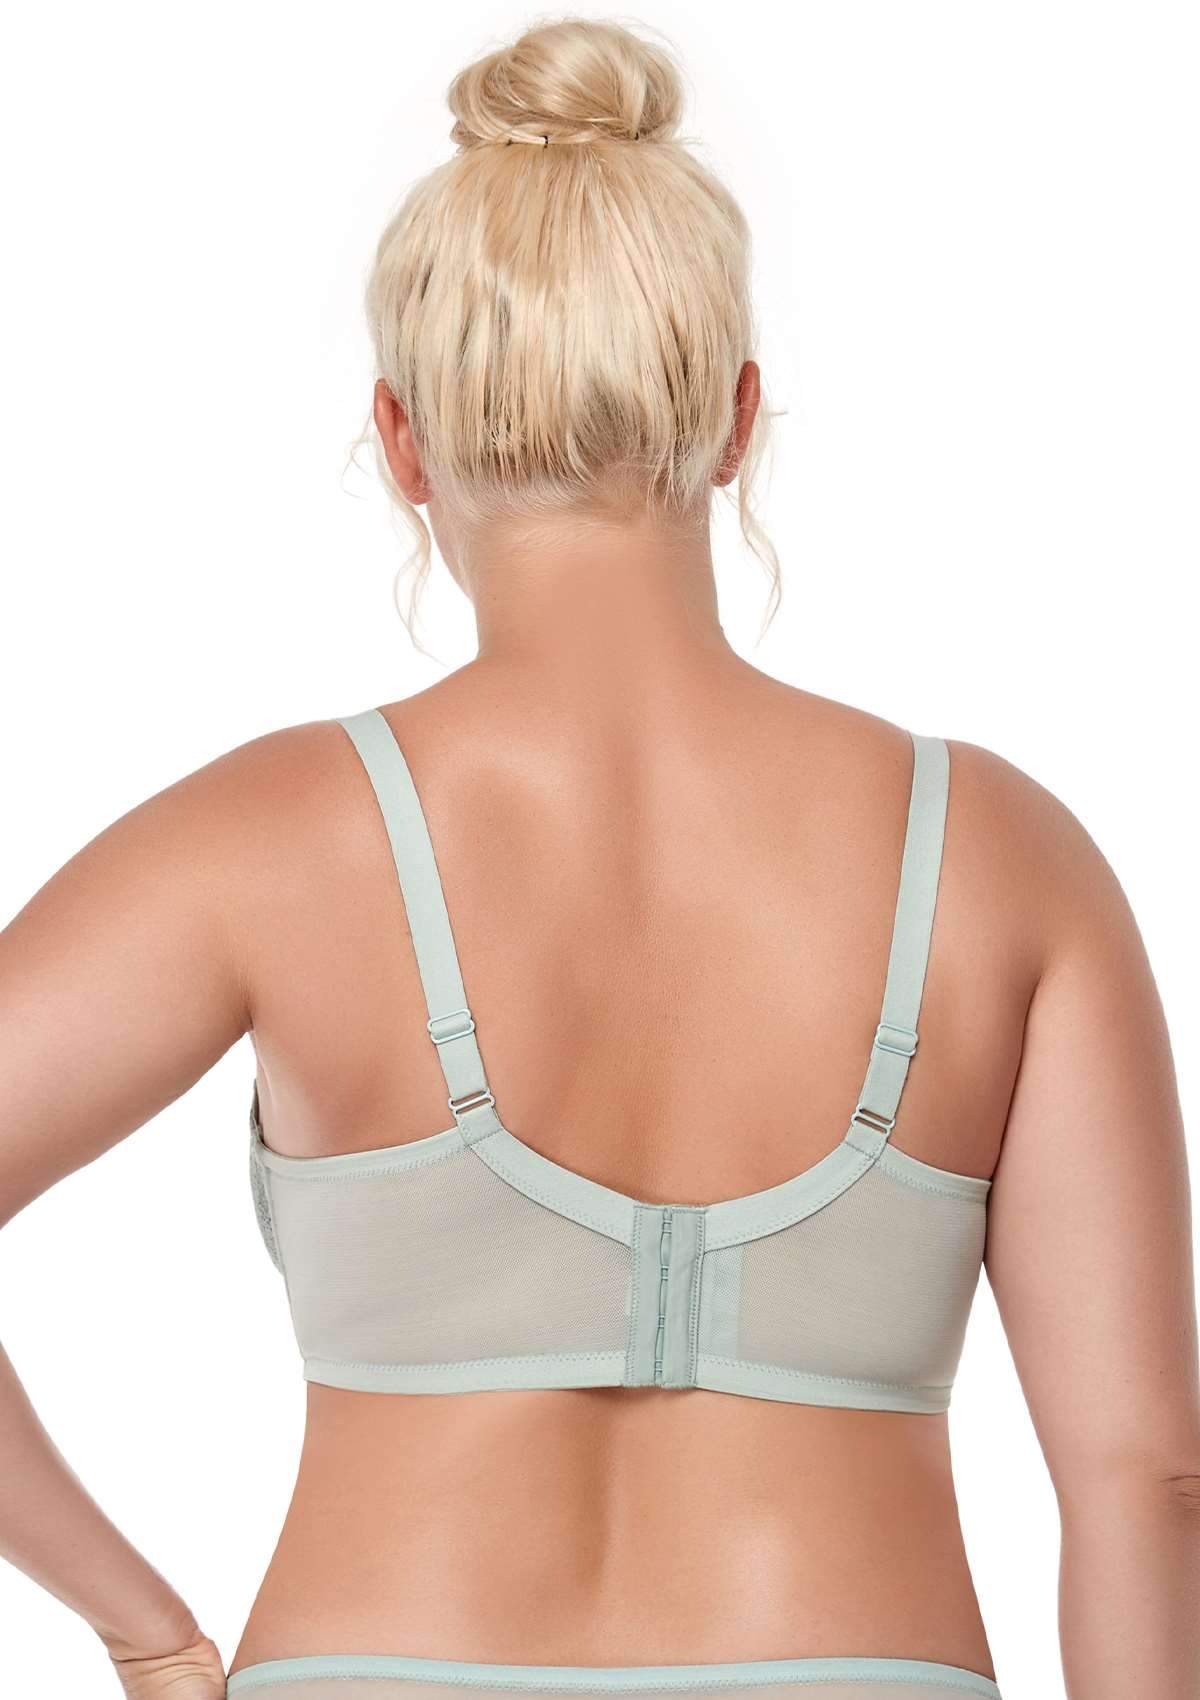 HSIA All-Over Floral Lace: Best Bra For Elderly With Sagging Breasts - Pewter Blue / 38 / DDD/F